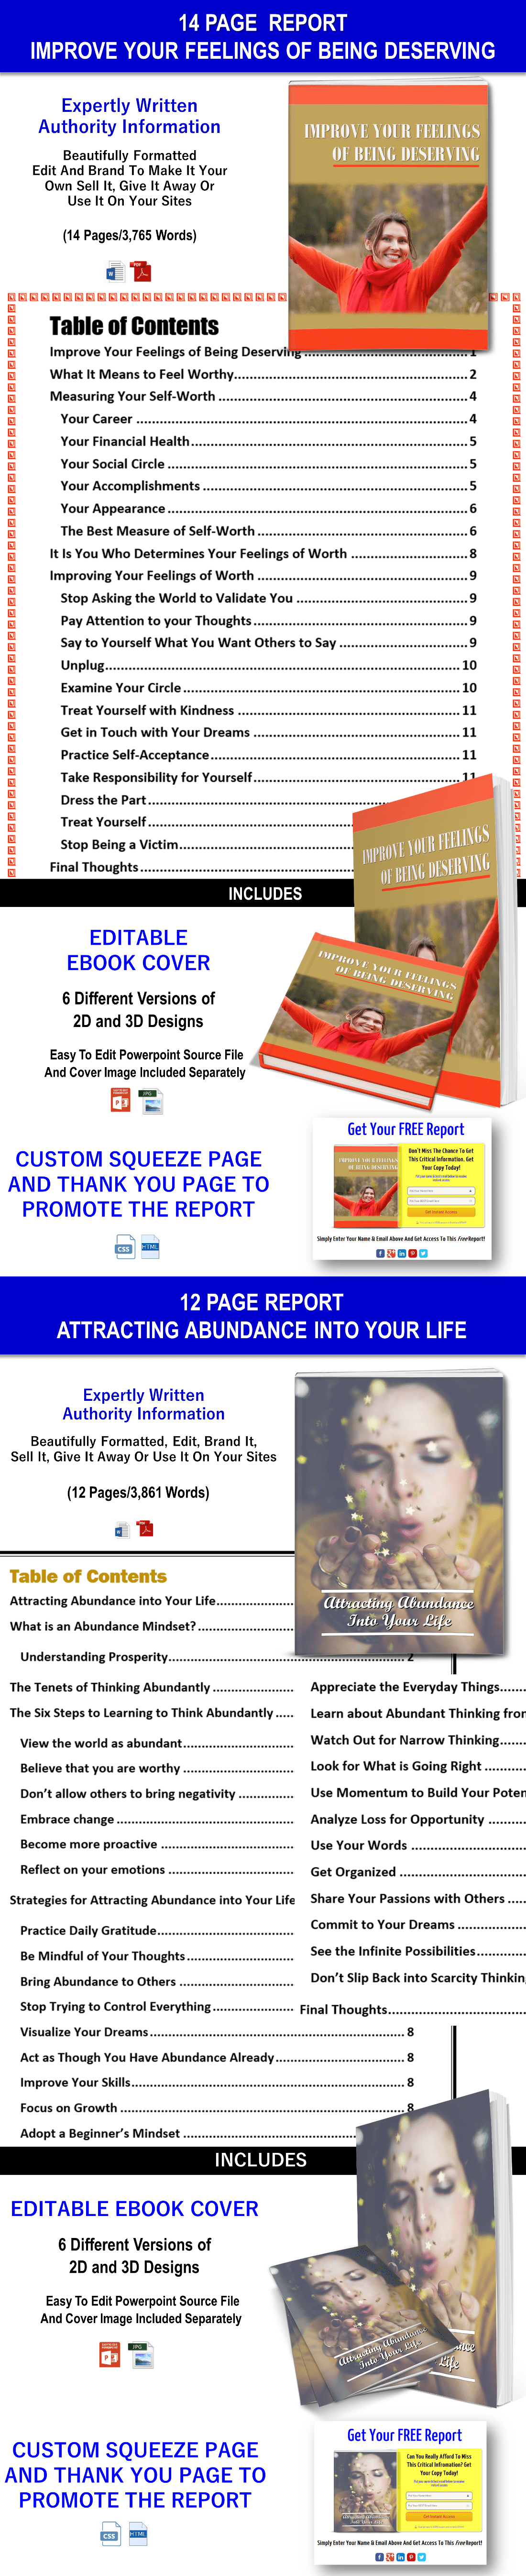 Ecourse - From Comfort Zone To Courage Zone – Transform Your Life By Taking Smart And Calculated Risks Content Pack with PLR Rights